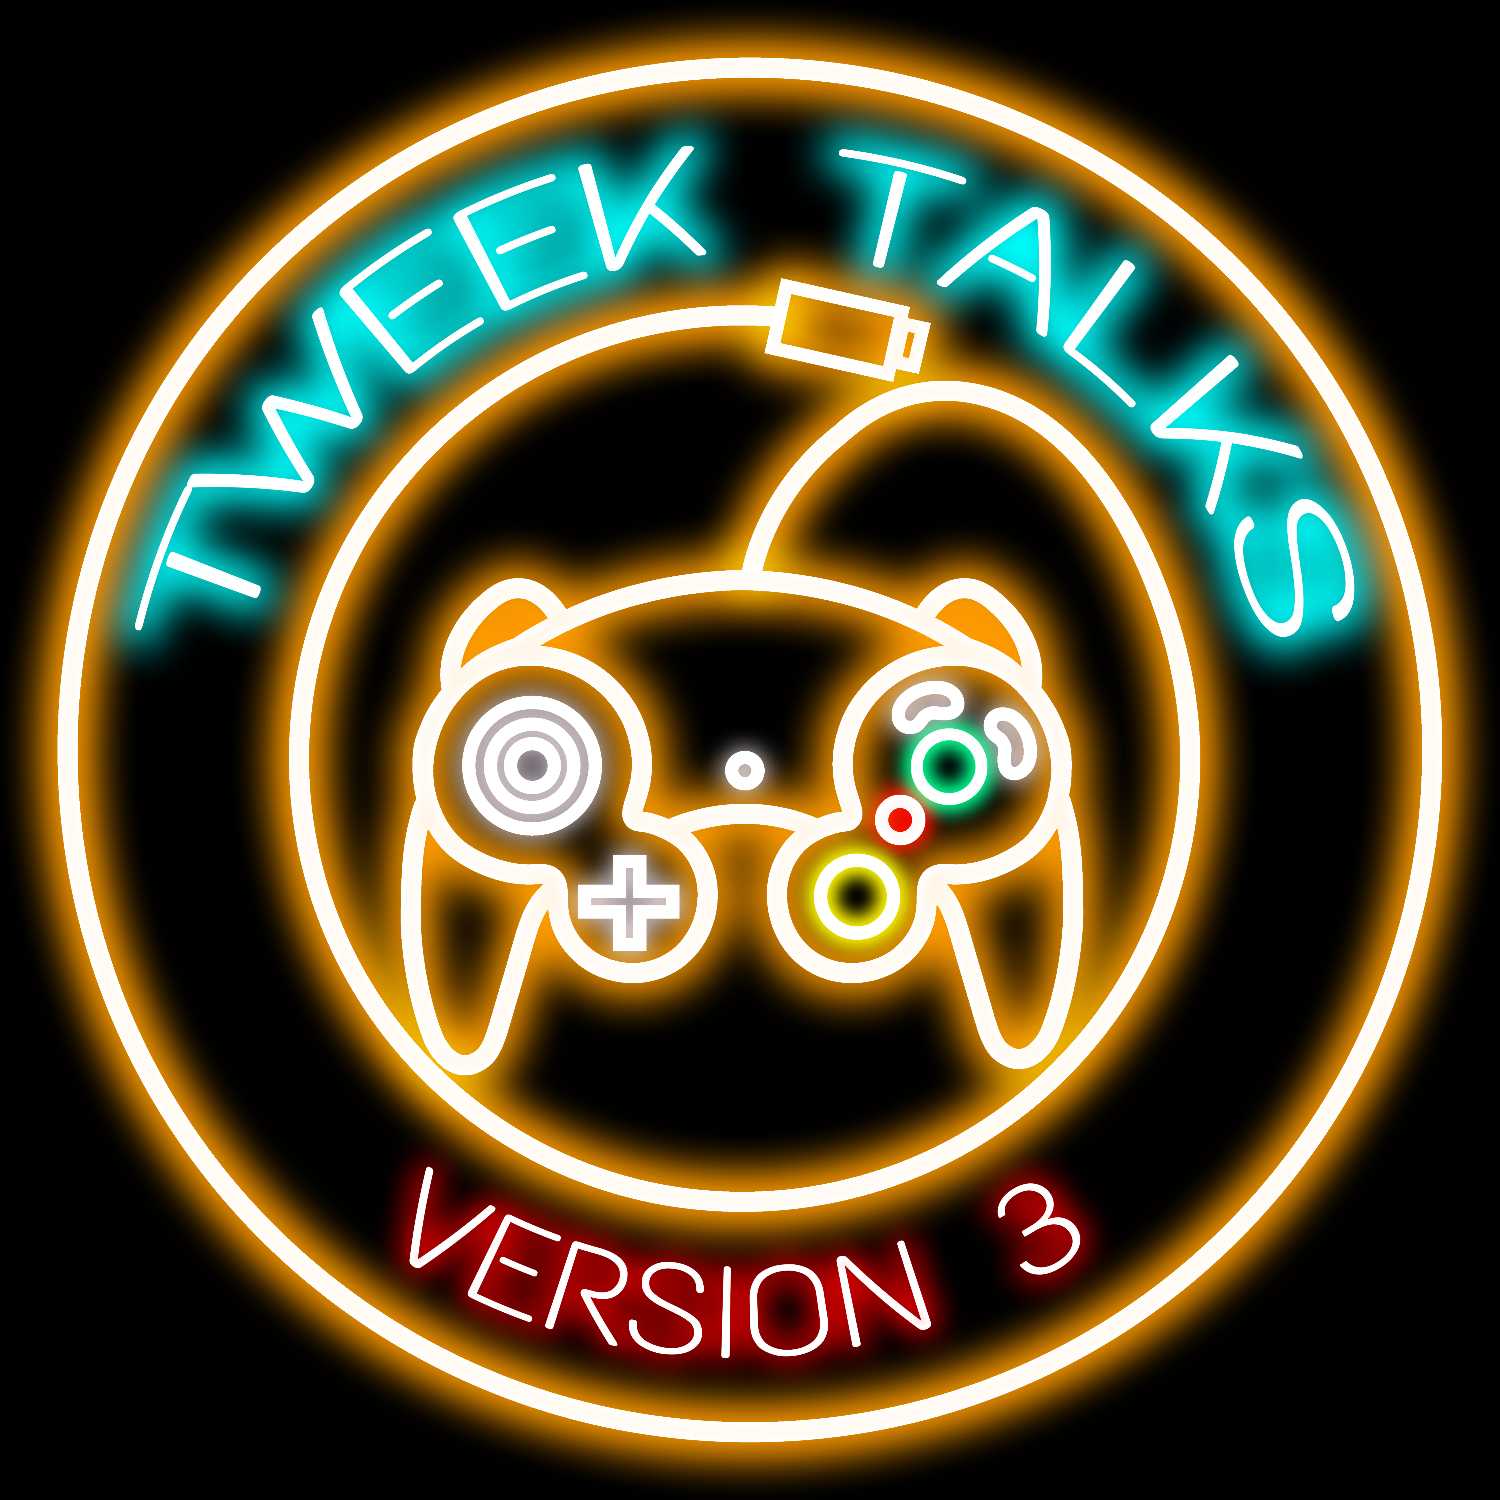 Tweek Talks with TKbreezy (Commentary, Coaching and more!) Episode 136